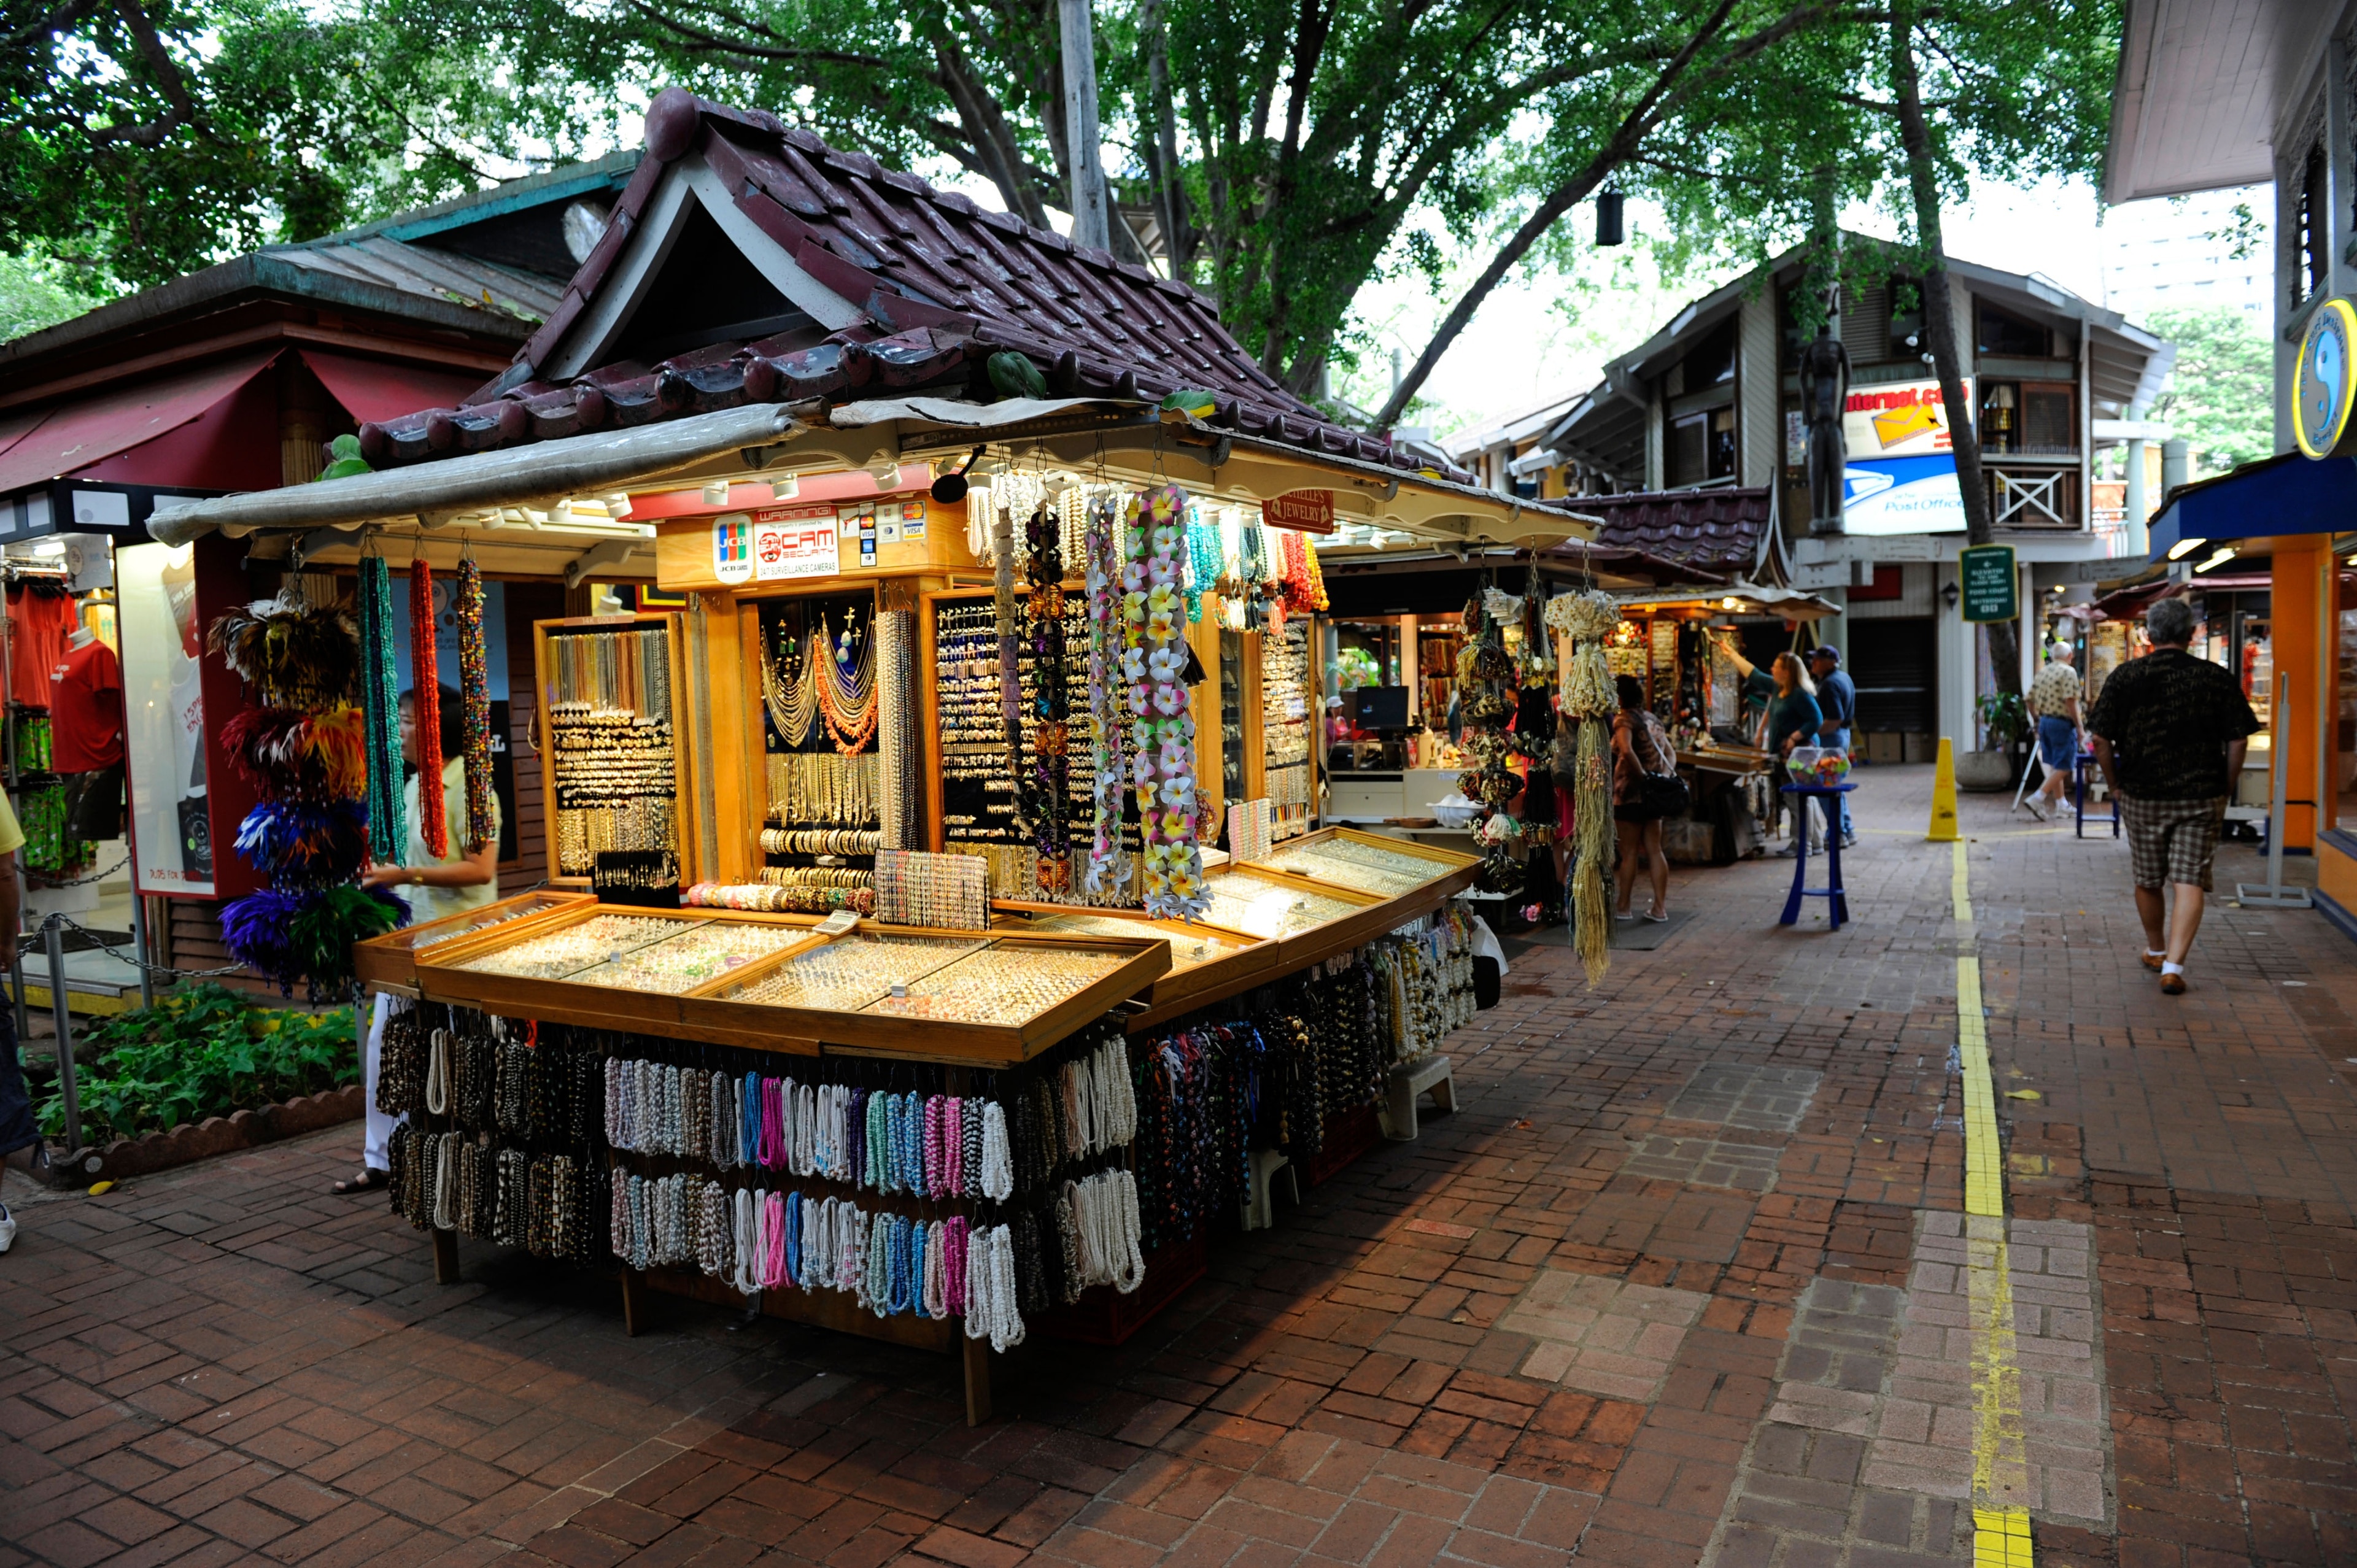 Hilton Hawaiian Village Shops is one of the best places to shop in Honolulu